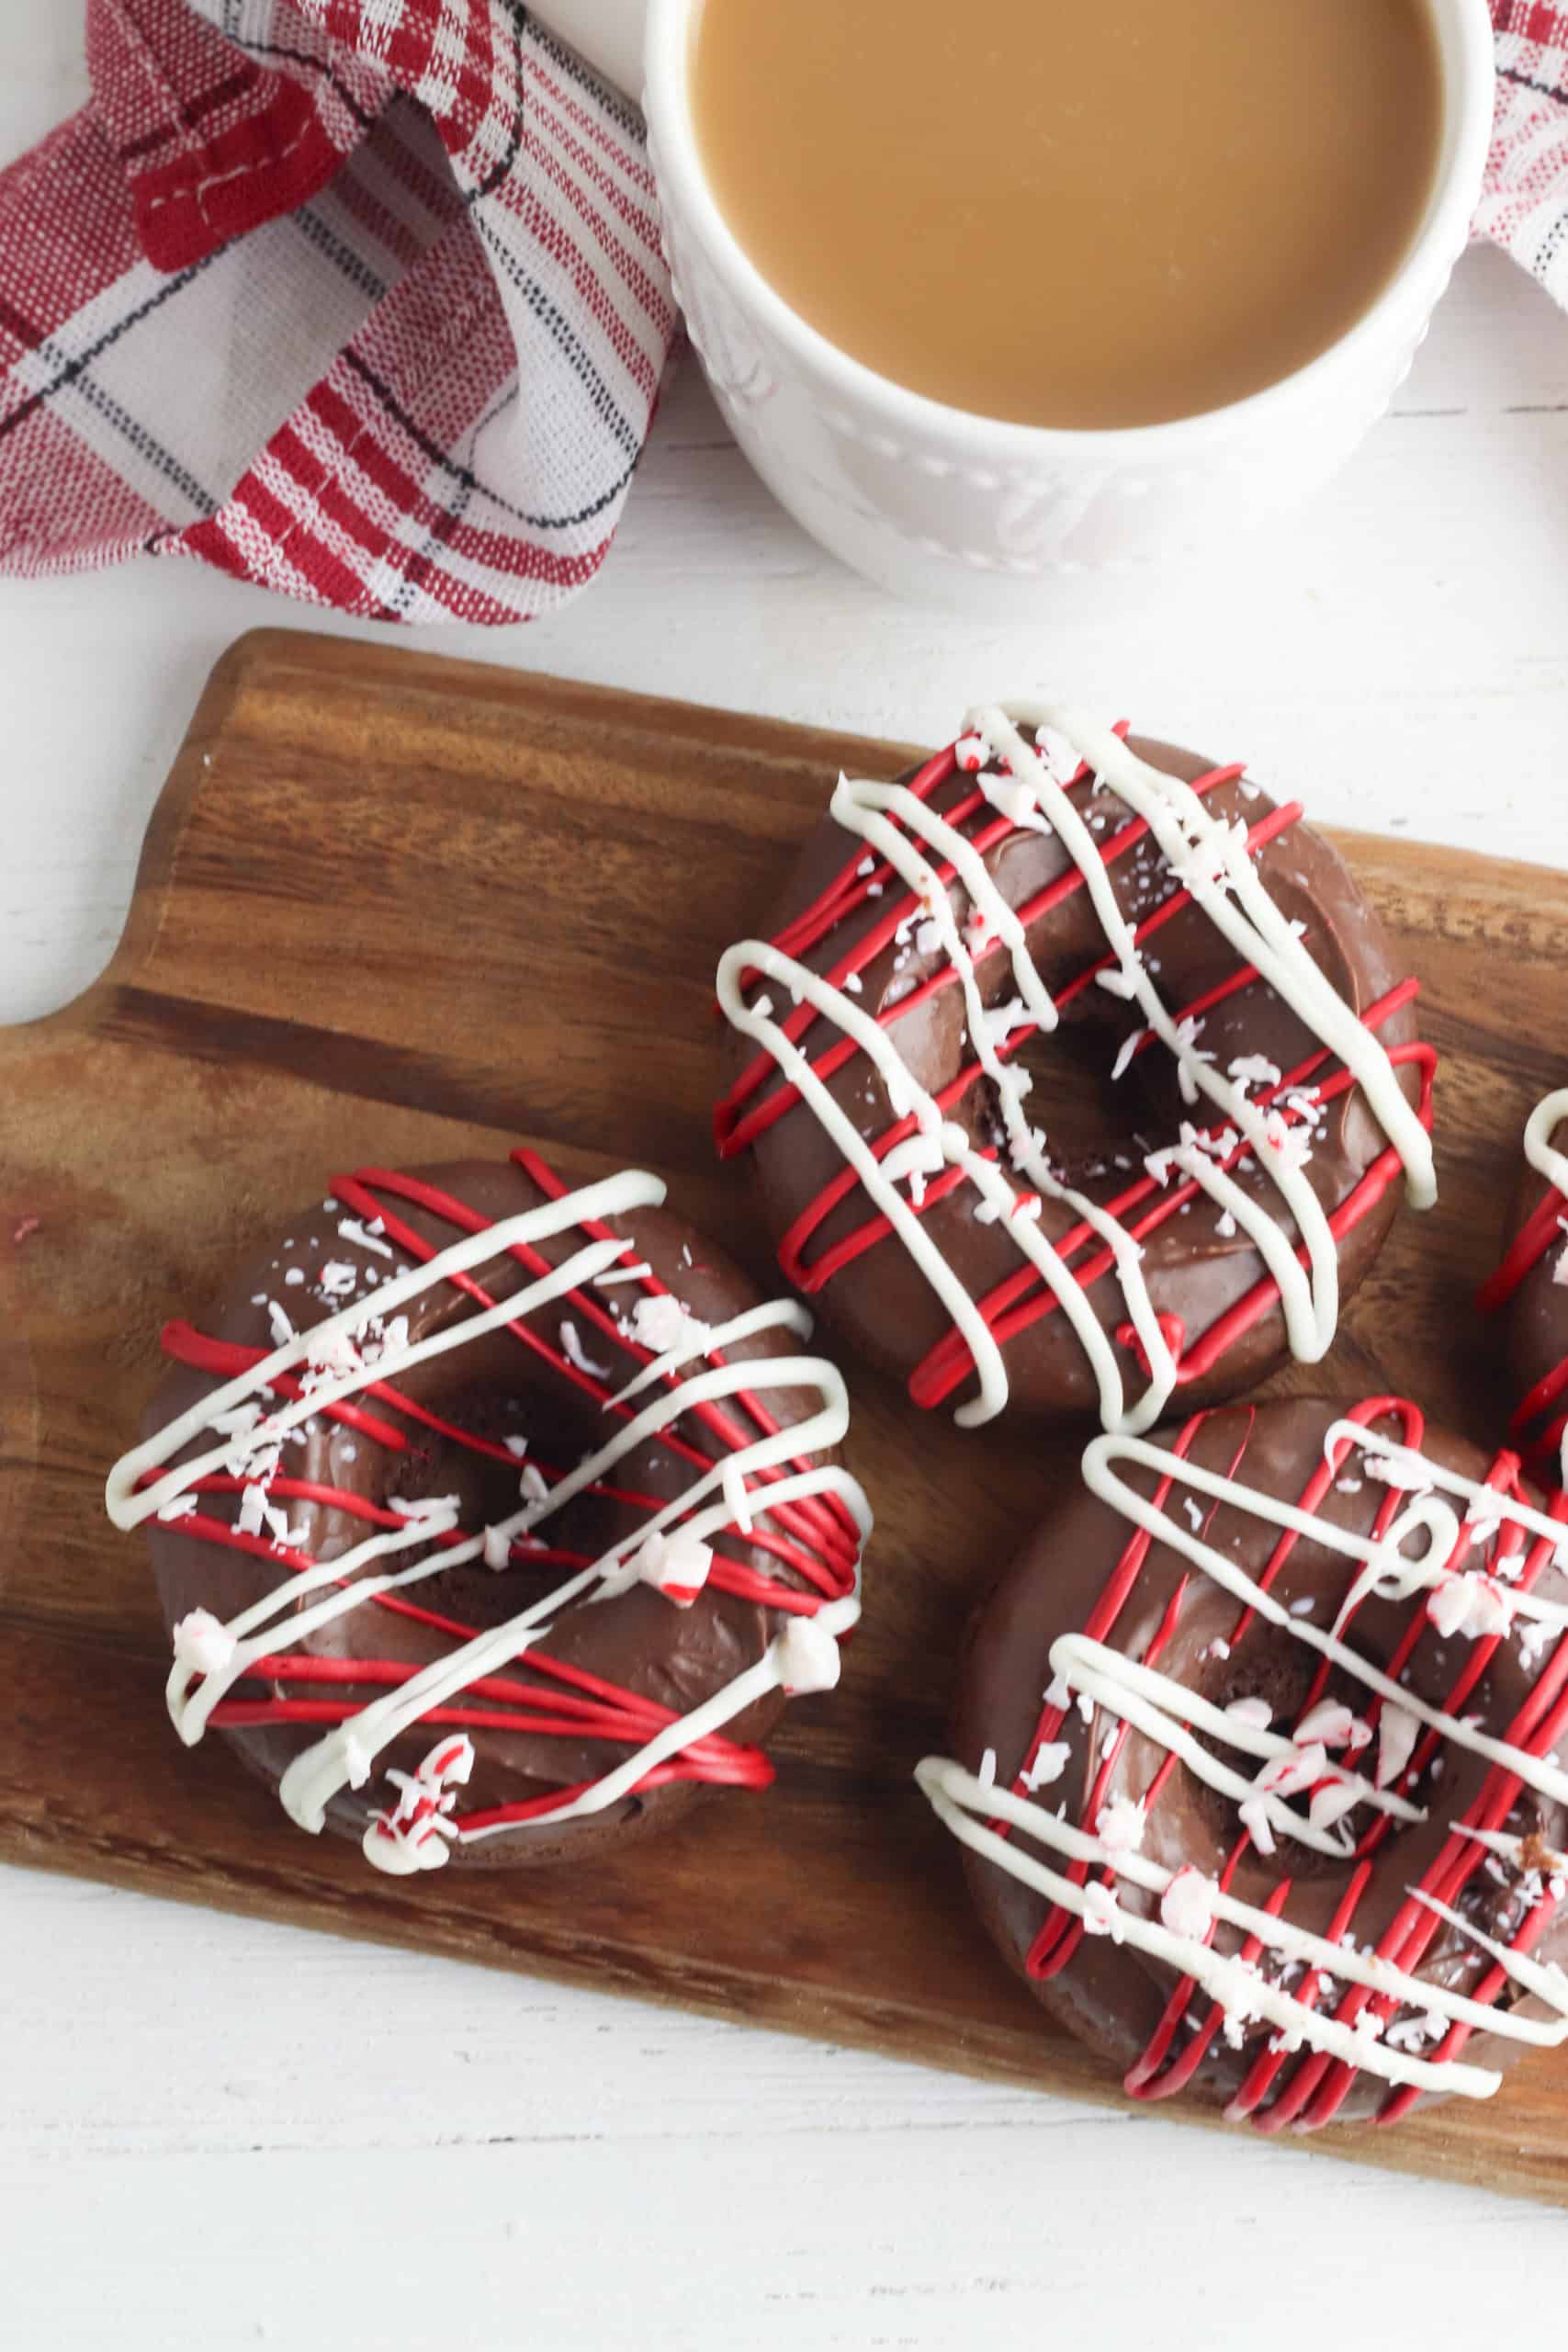 peppermint mocha donuts on a wooden cutting board with plaid napkin